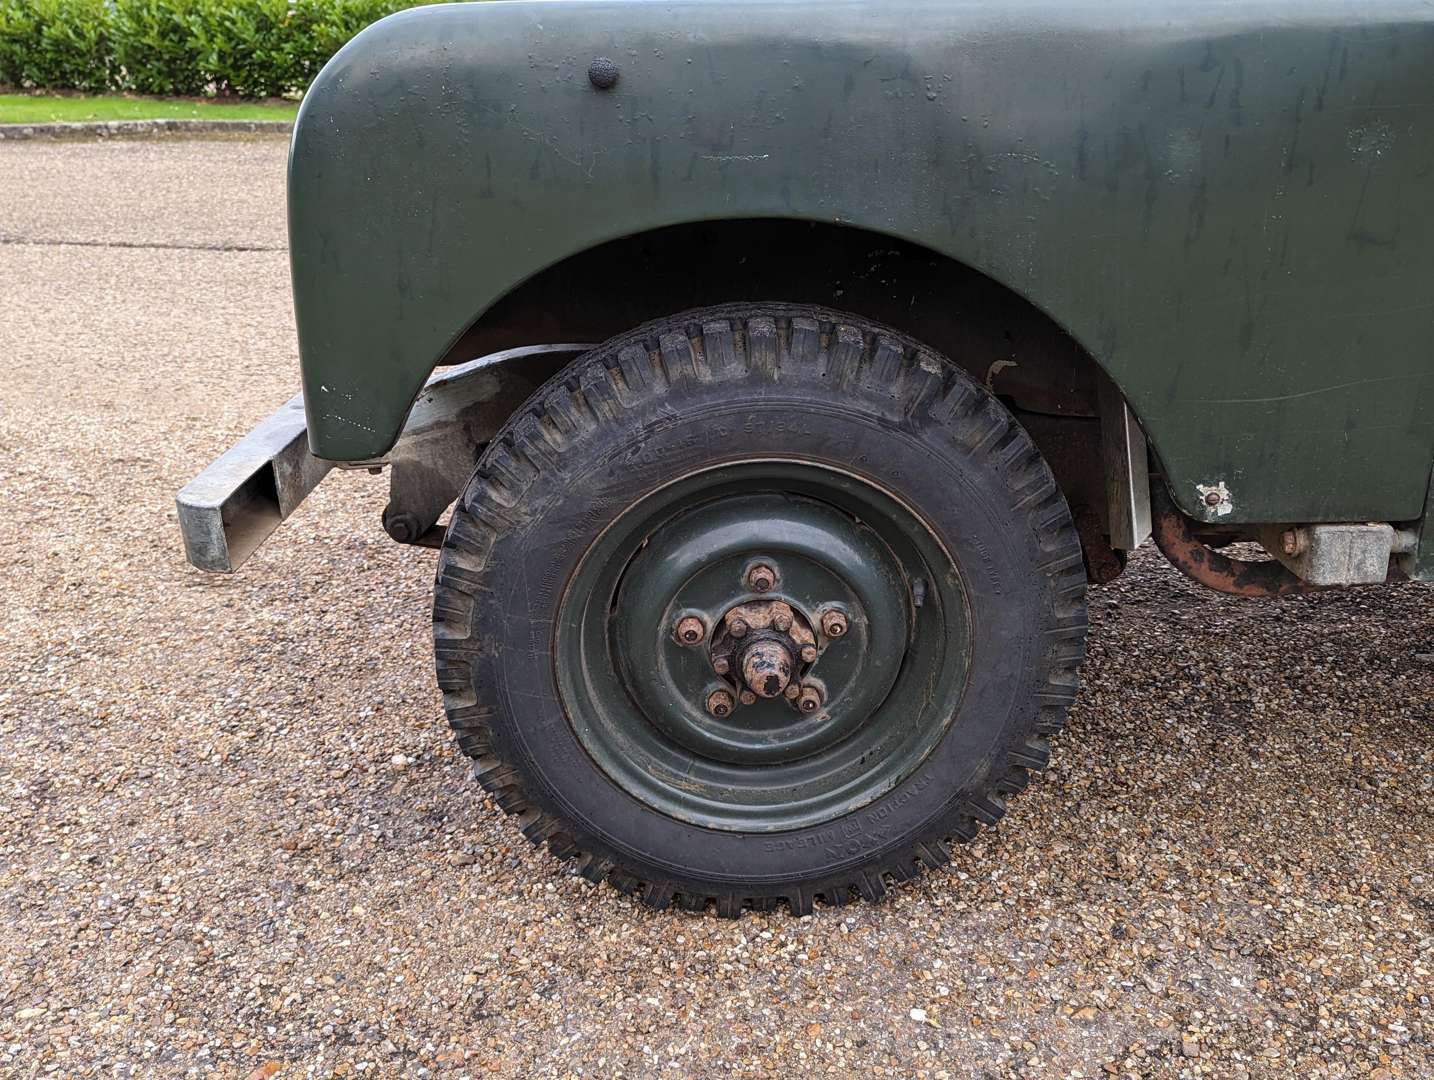 <p>1950 LAND ROVER 80" SWB SERIES I PREVIOUSLY OWNED BY CHRIS REA</p>